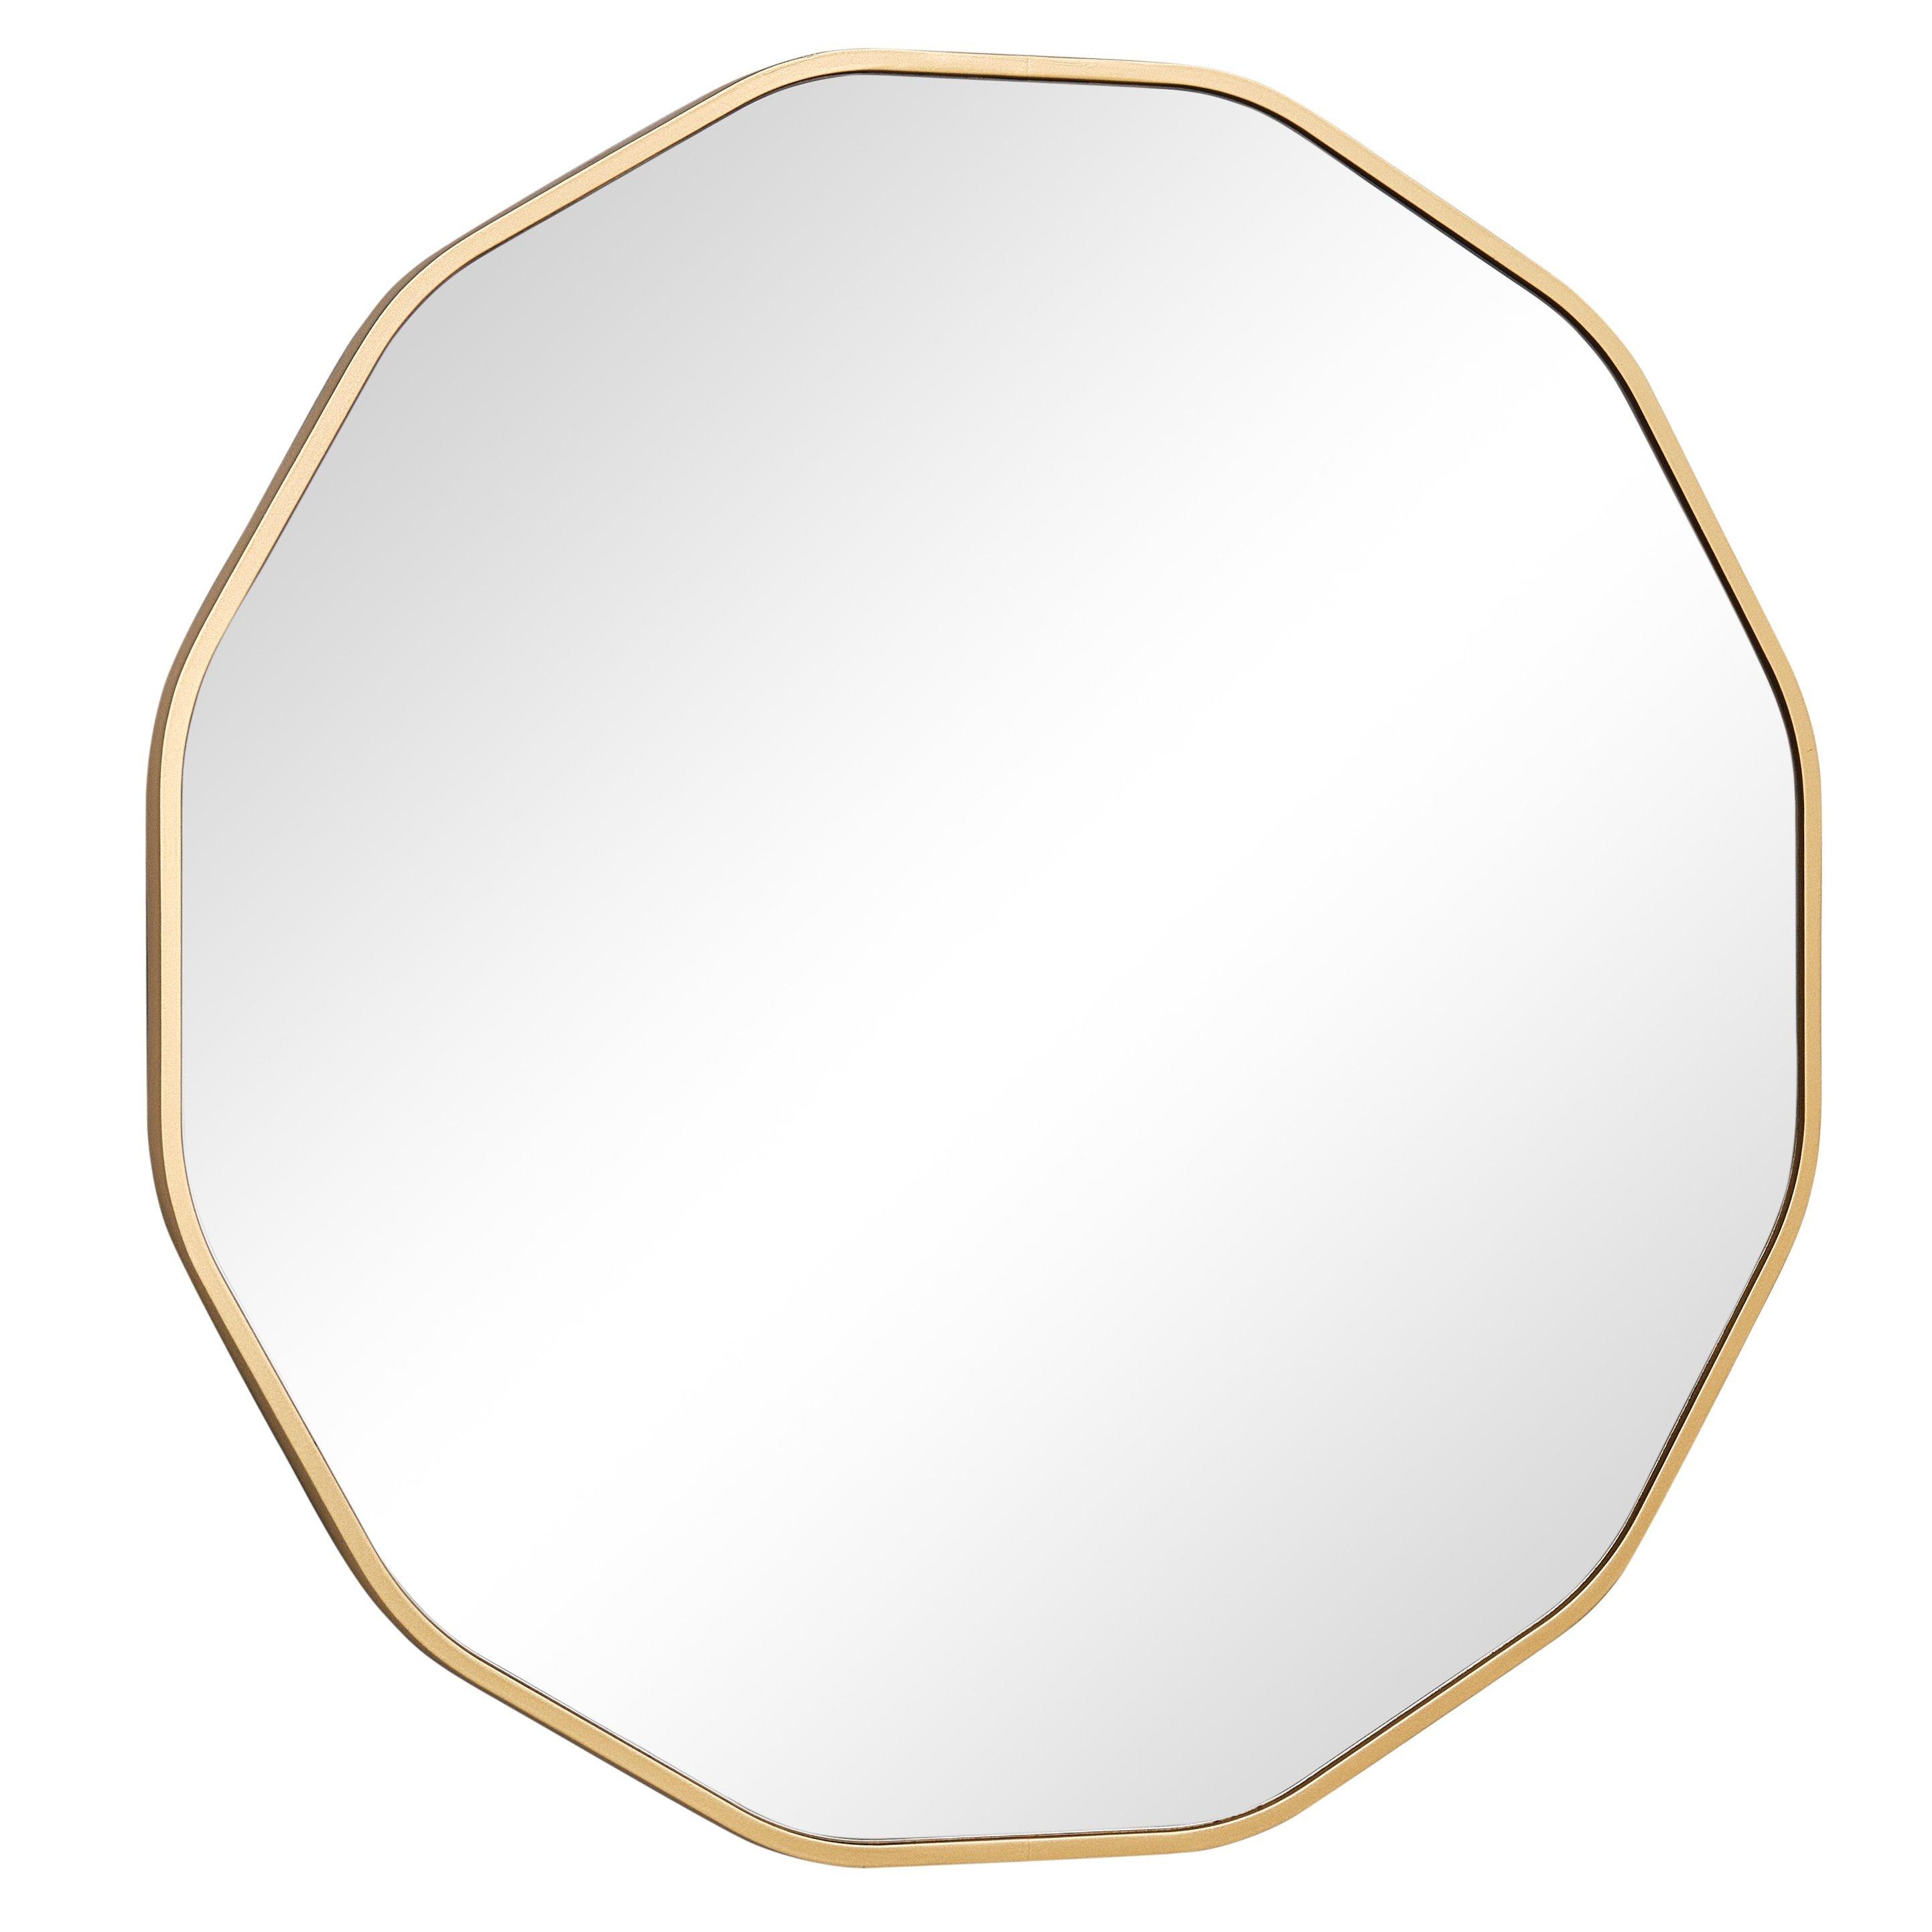 Large Round Gold Scalloped Wall Mirror 90cm X 90cm